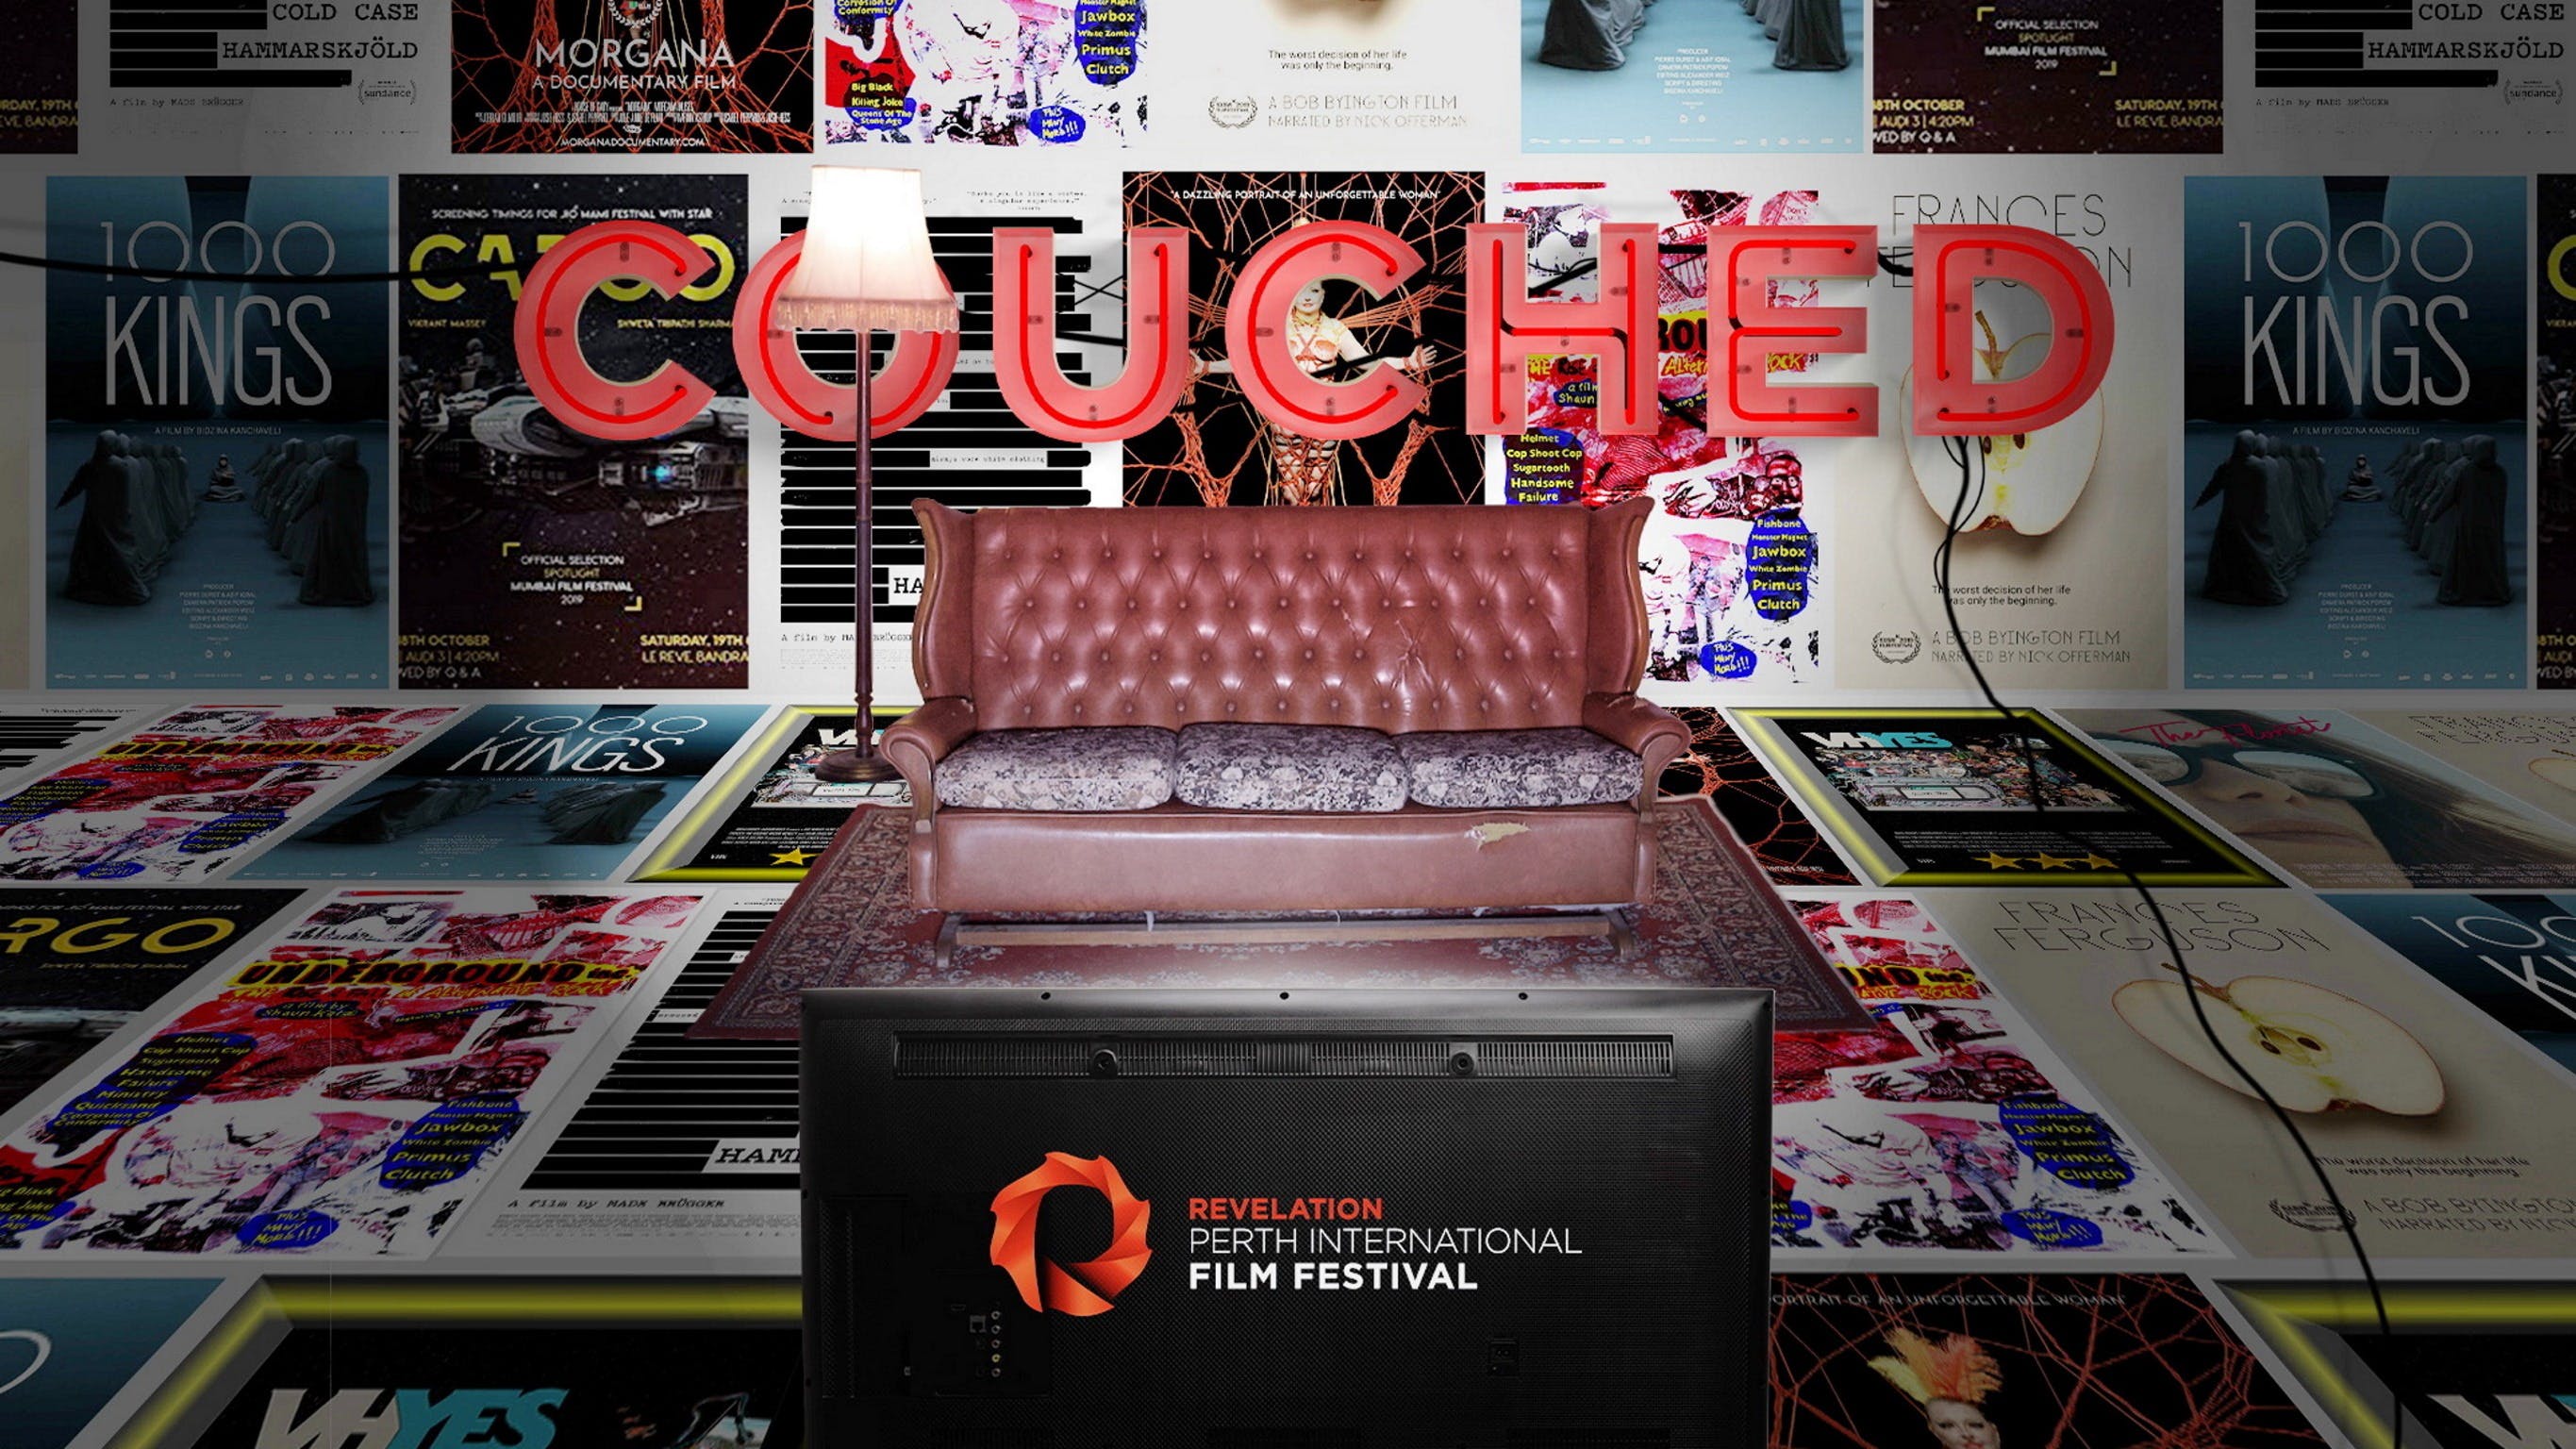 COUCHED - Revelation Perth International Film Festival - Tourism Canberra